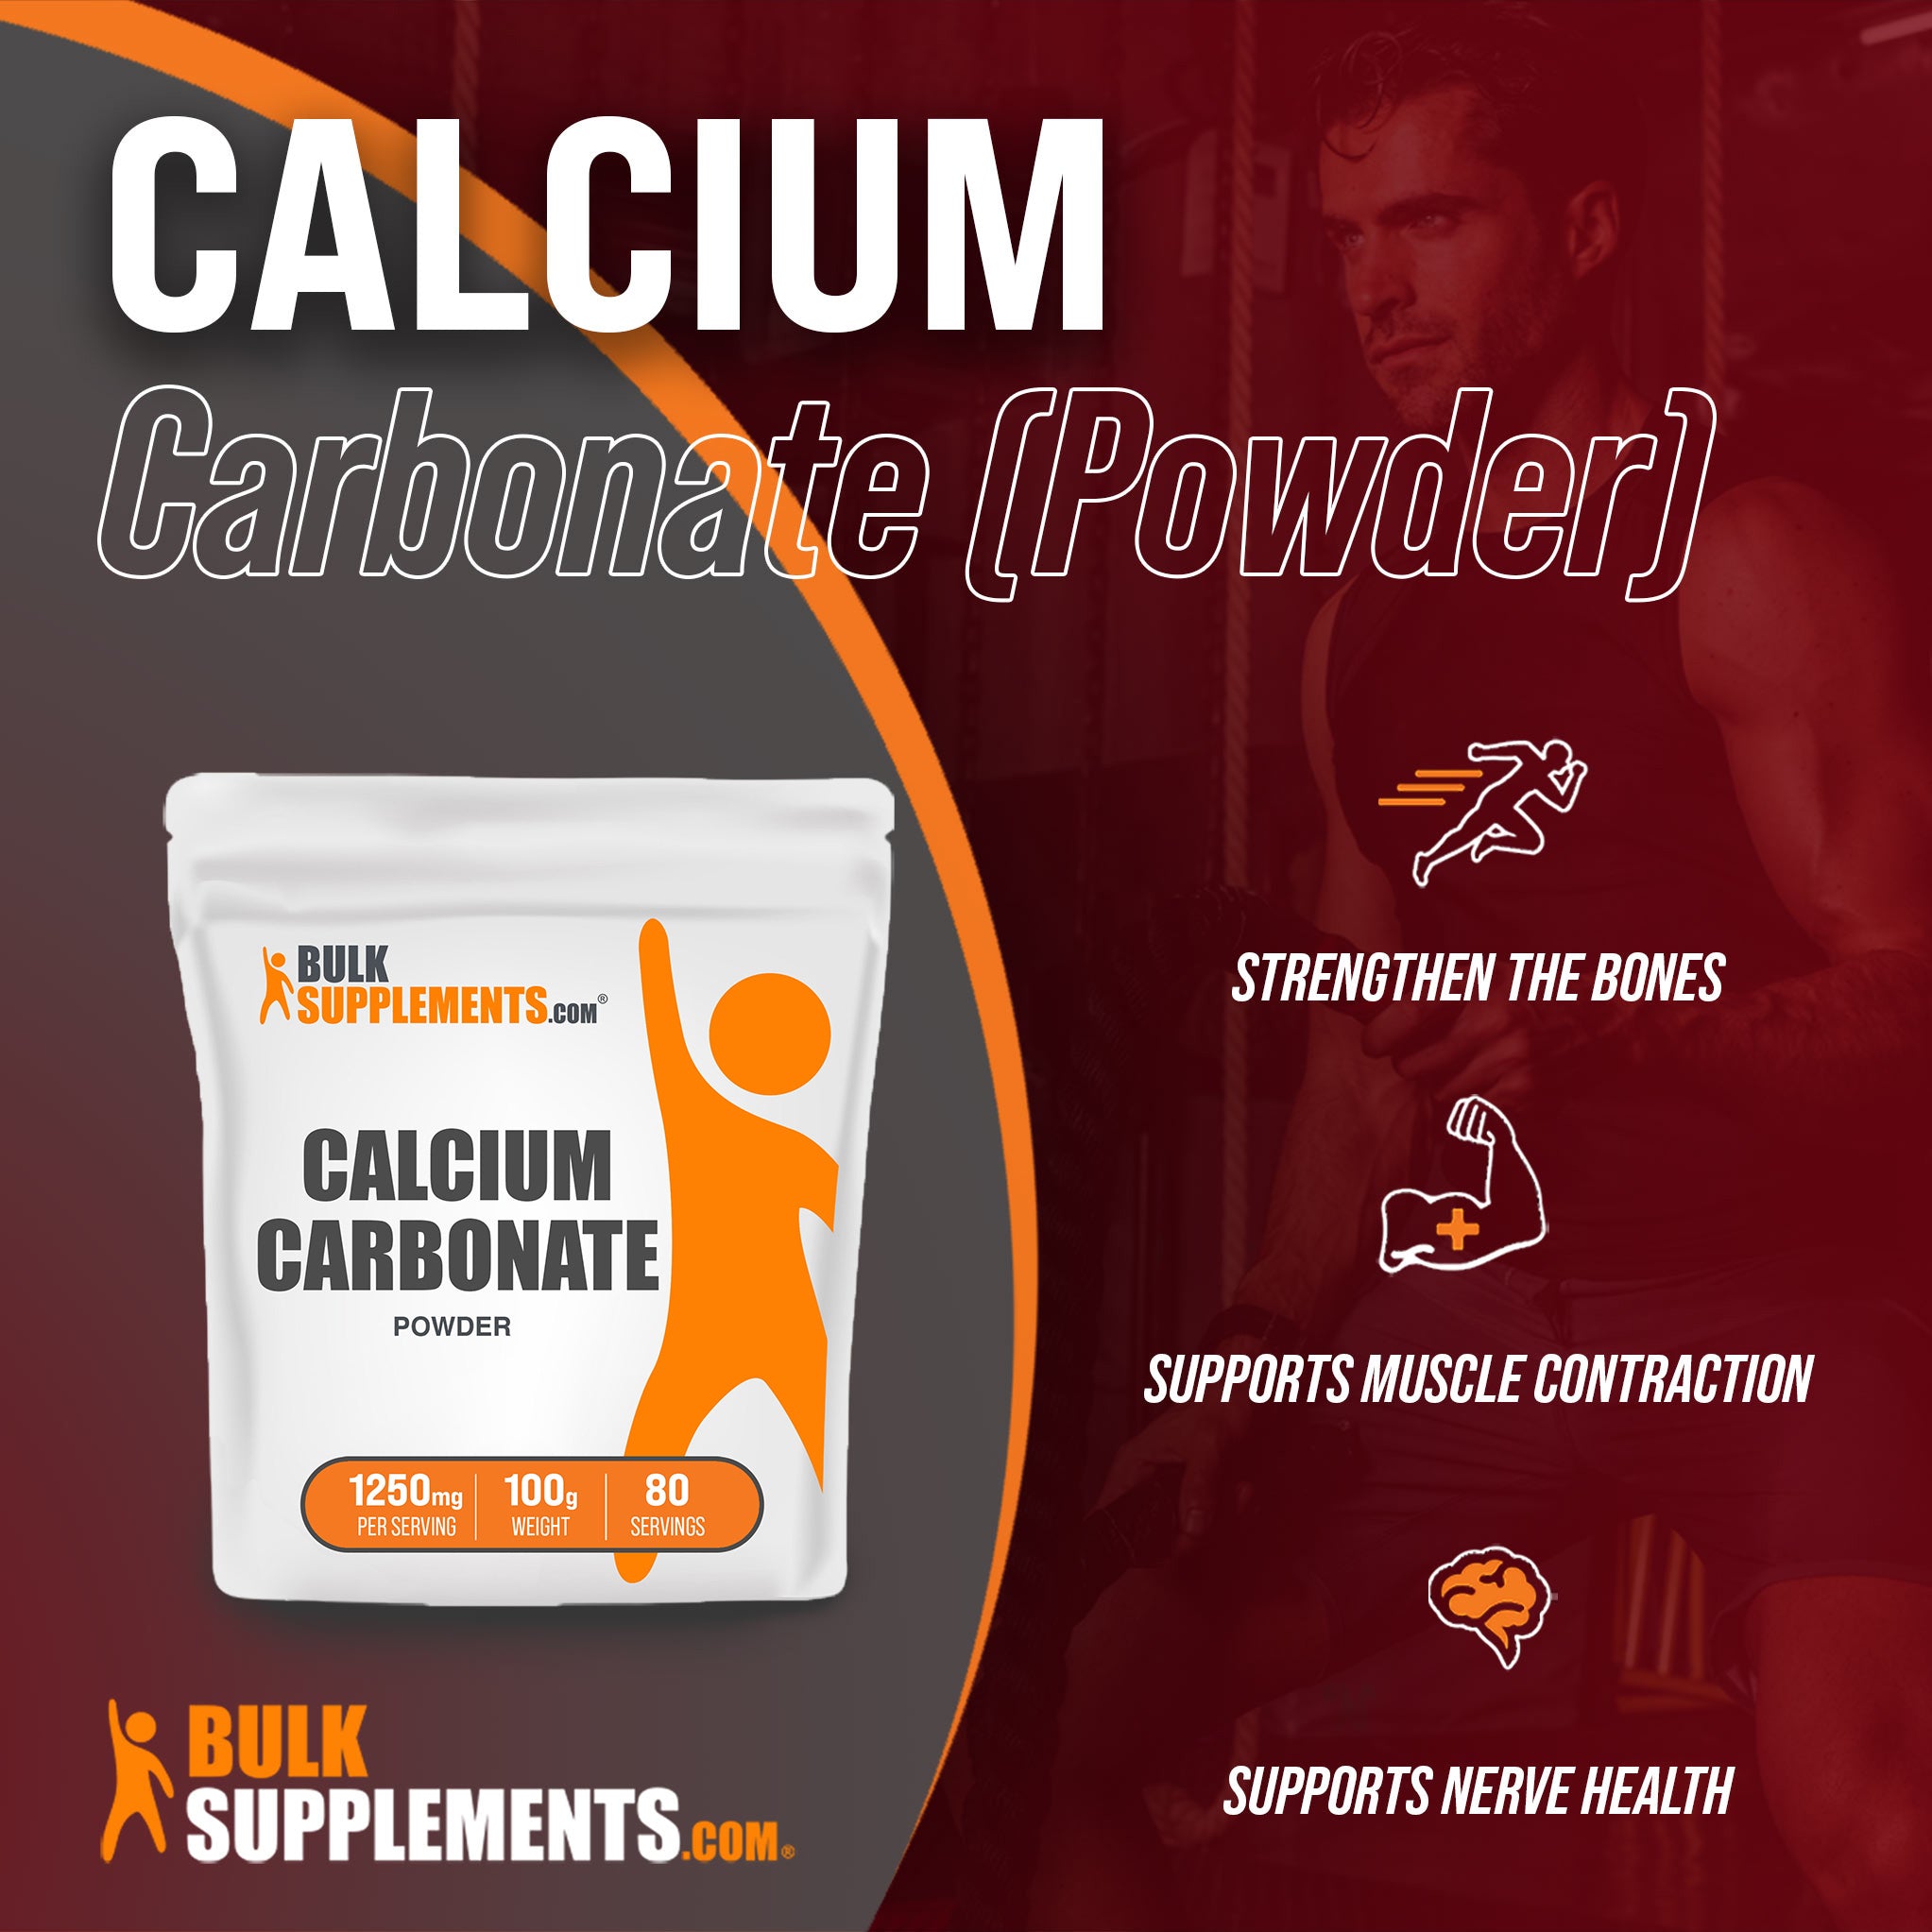 Benefits of Calcium Carbonate Powder; strengthen the bones, supports muscle contraction, supports nerve health